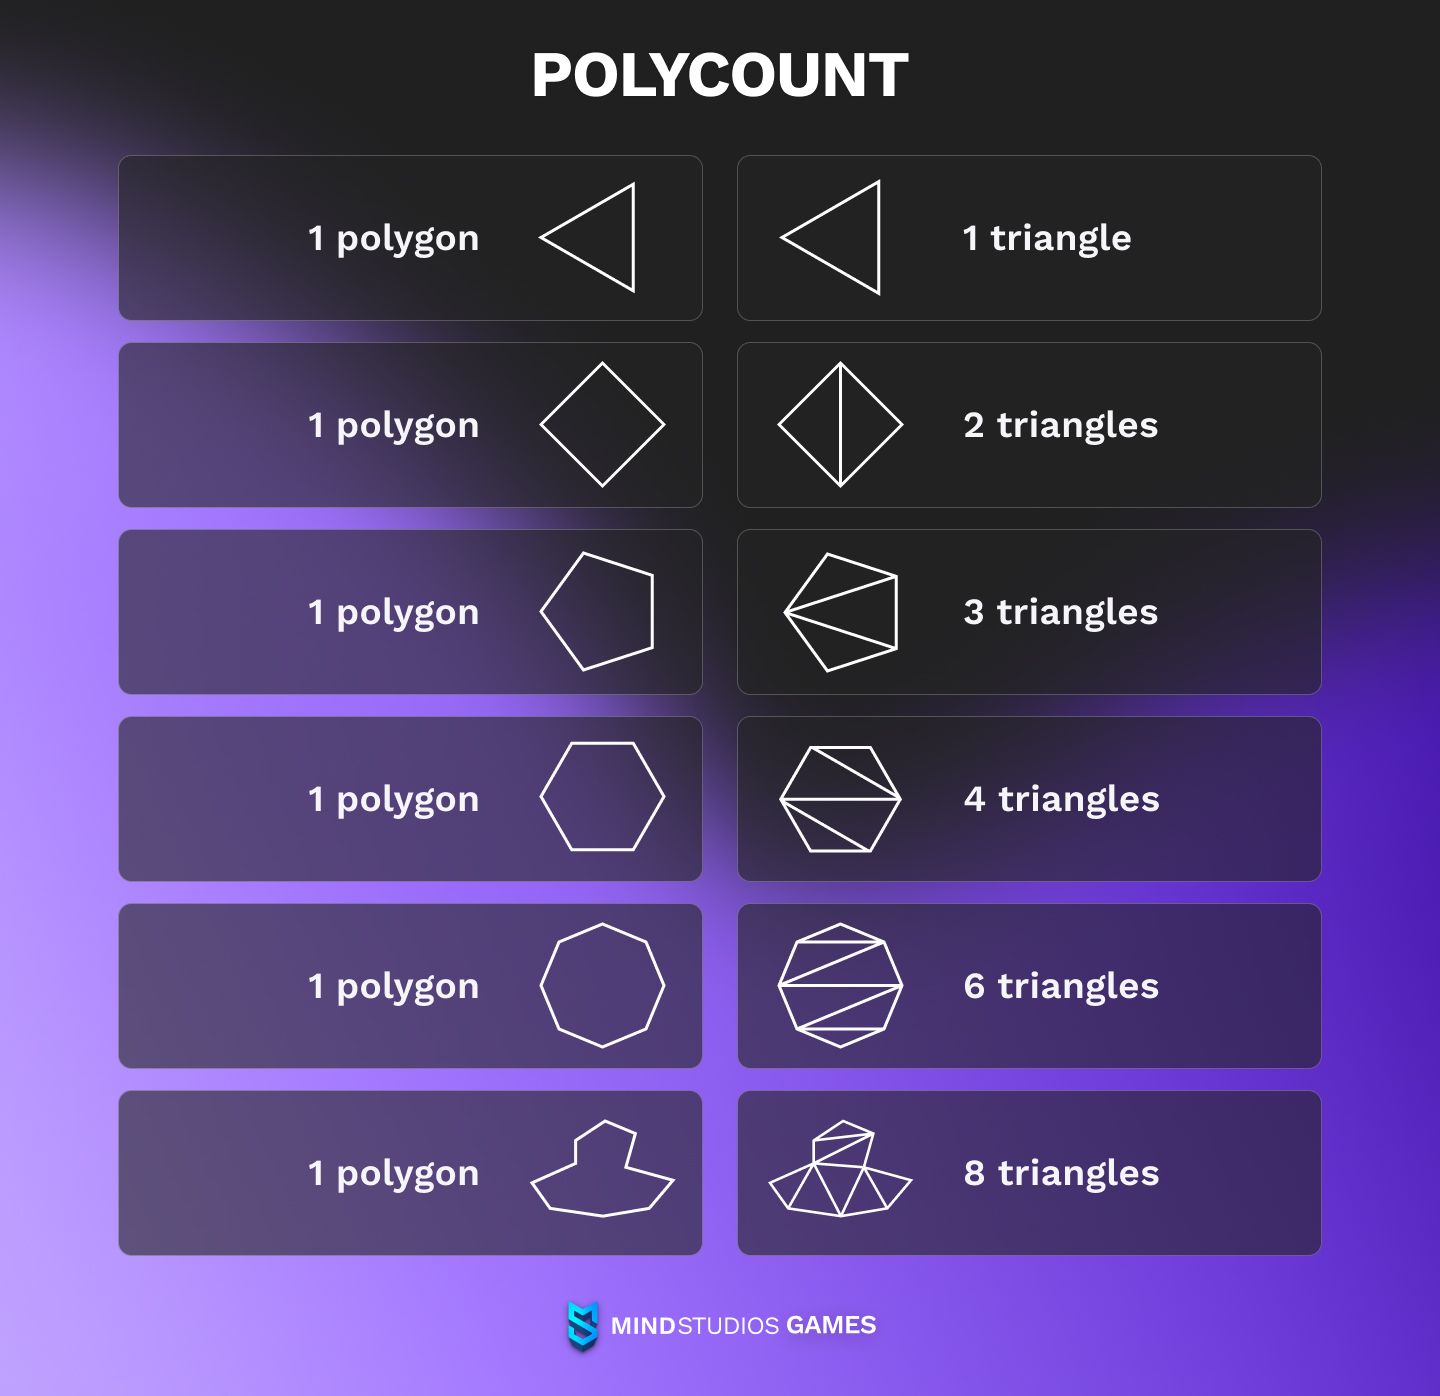 Different types of polygons